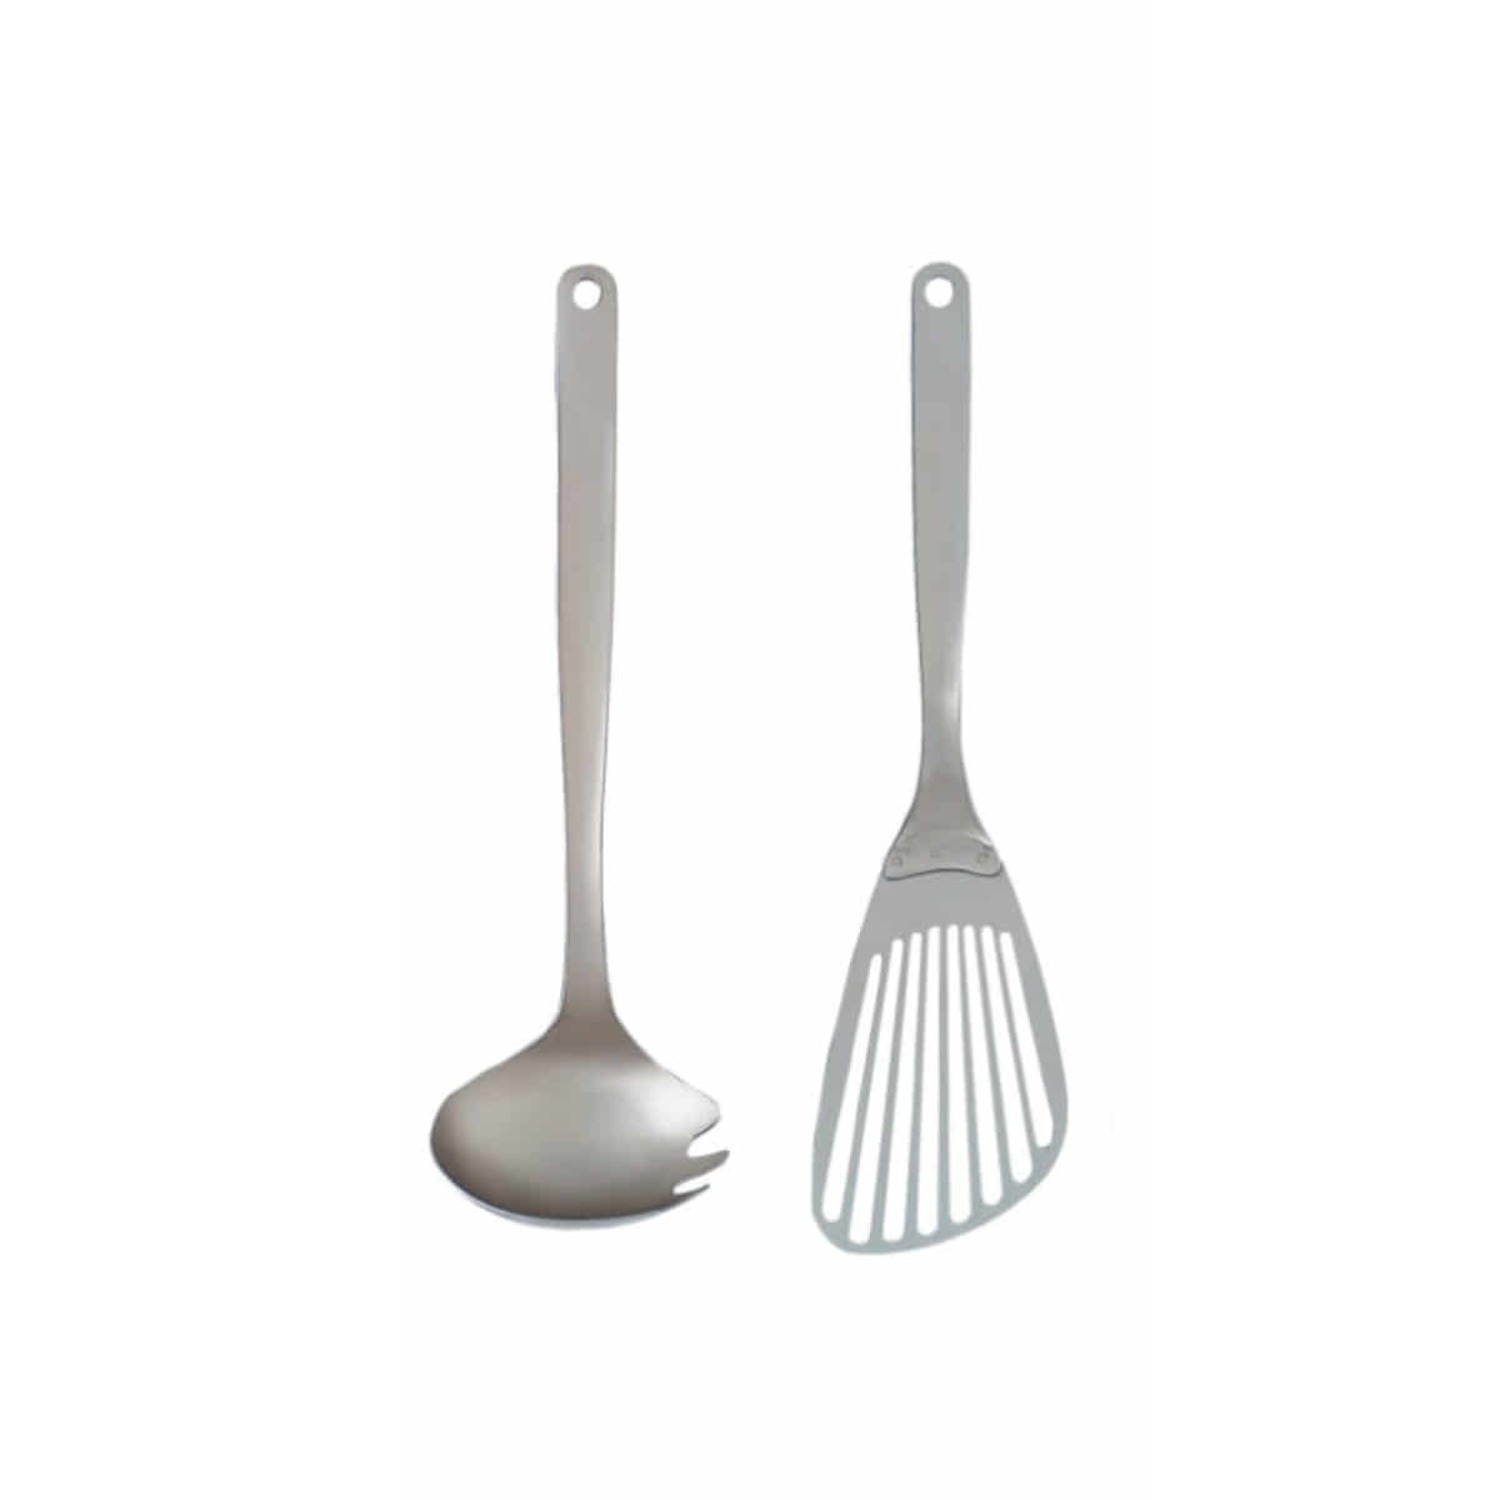 ﻿Stainless Steel Kitchen Tools - Fork Laddle/Turner